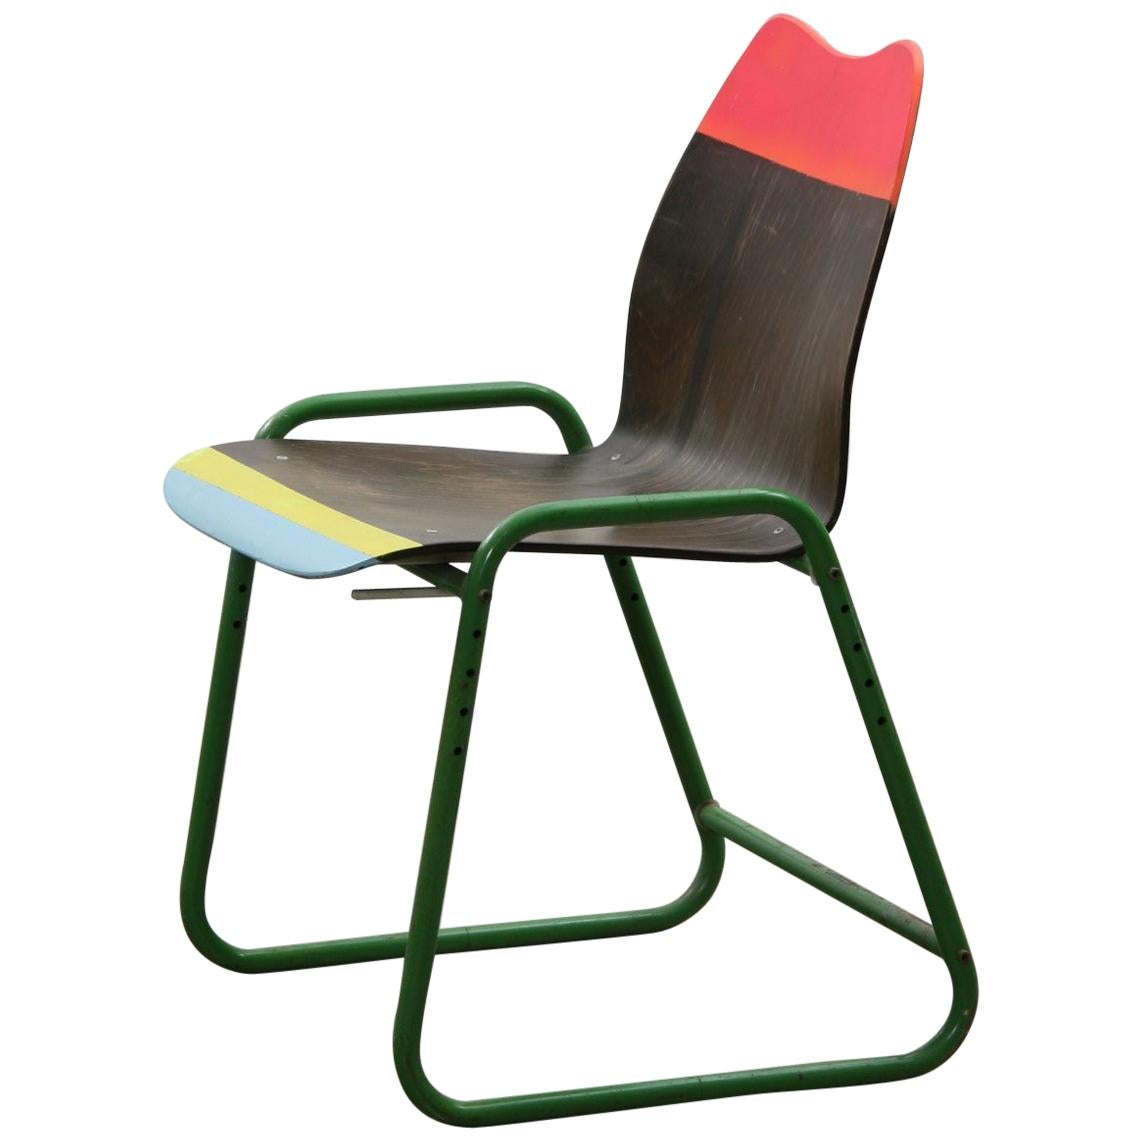 Hard Work, Functional Art Chair by Markus Friedrich Staab For Sale